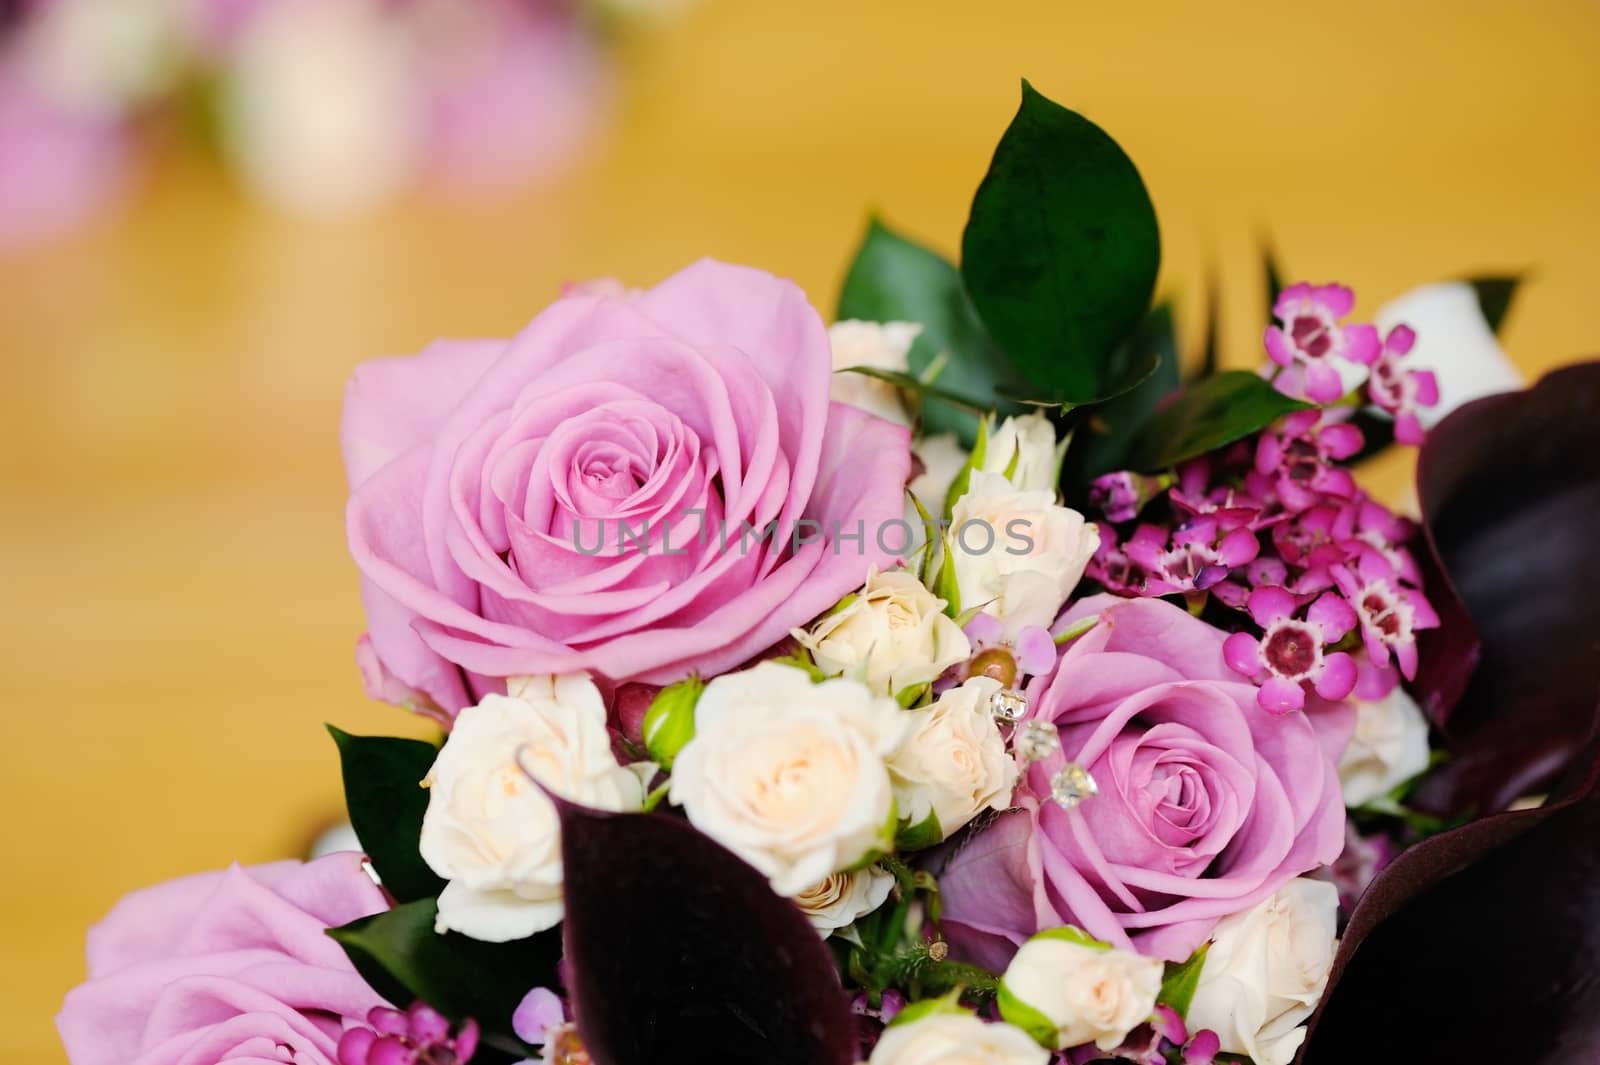 Detail of brides bouquet of pink roses on wedding day